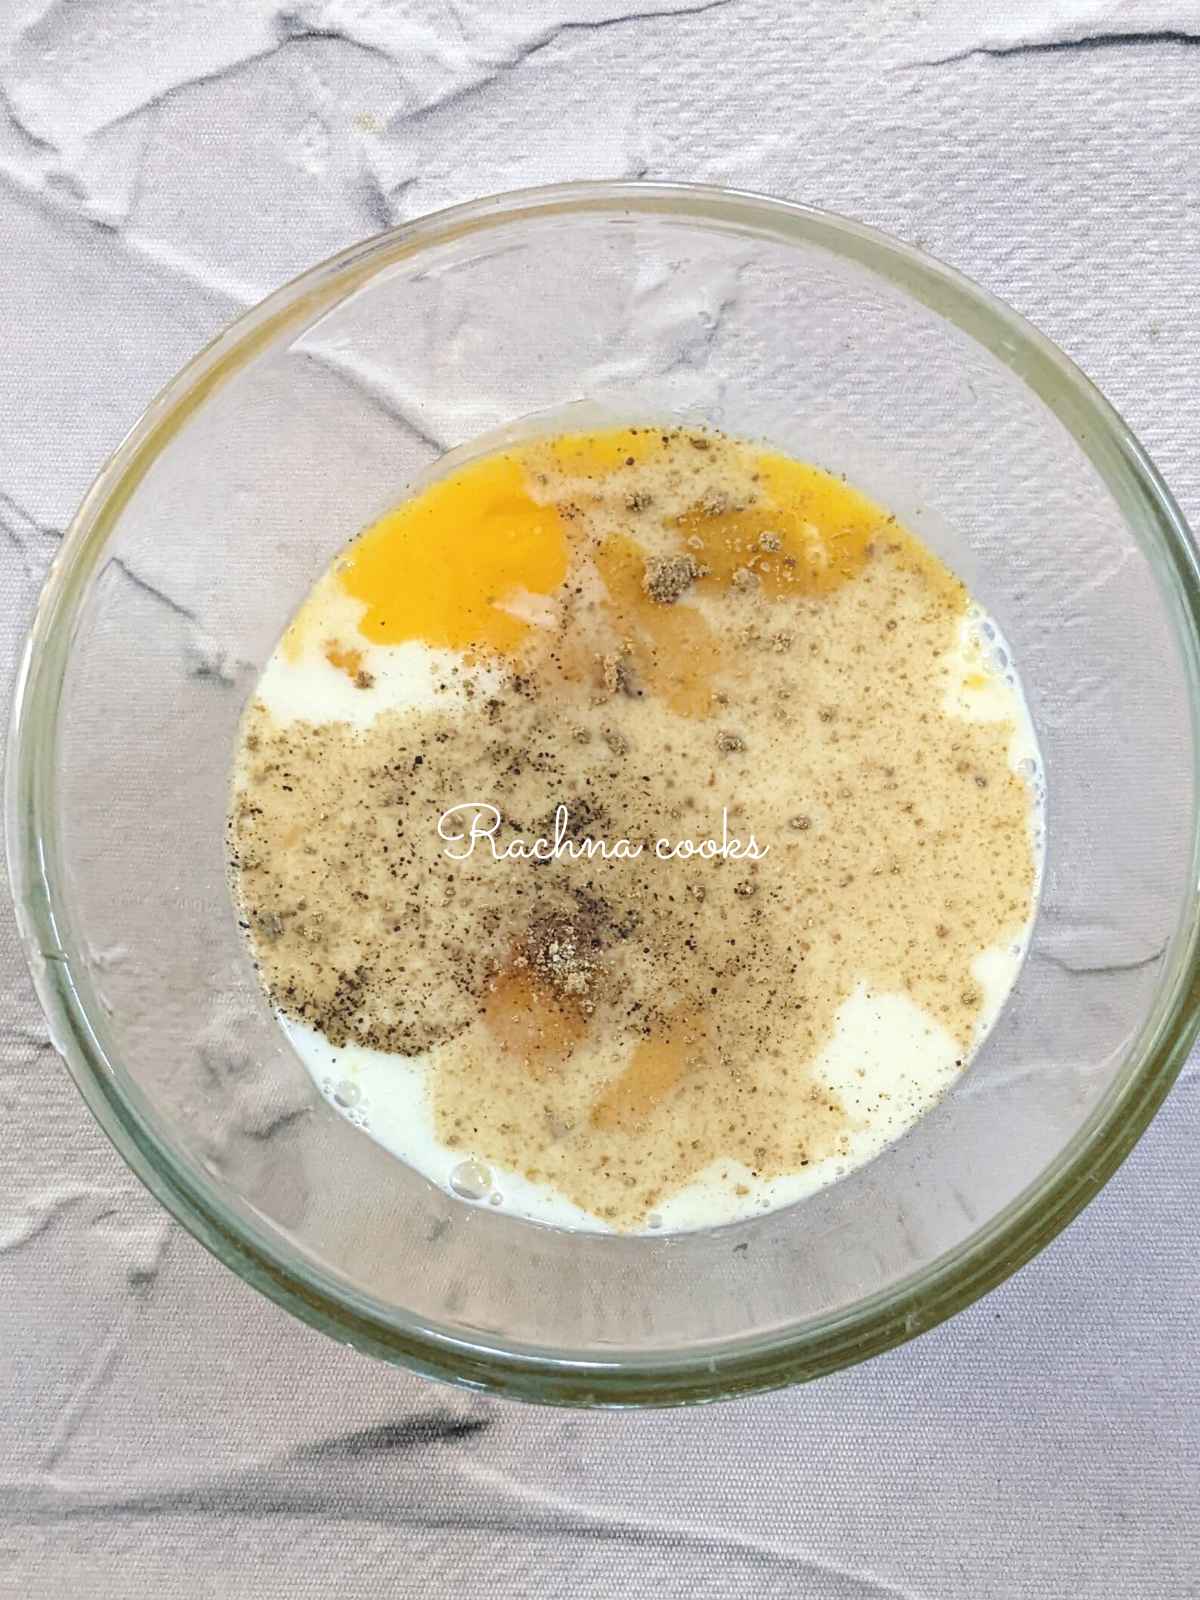 Eggs with milk, salt, pepper and garlic powder in a glass bowl.